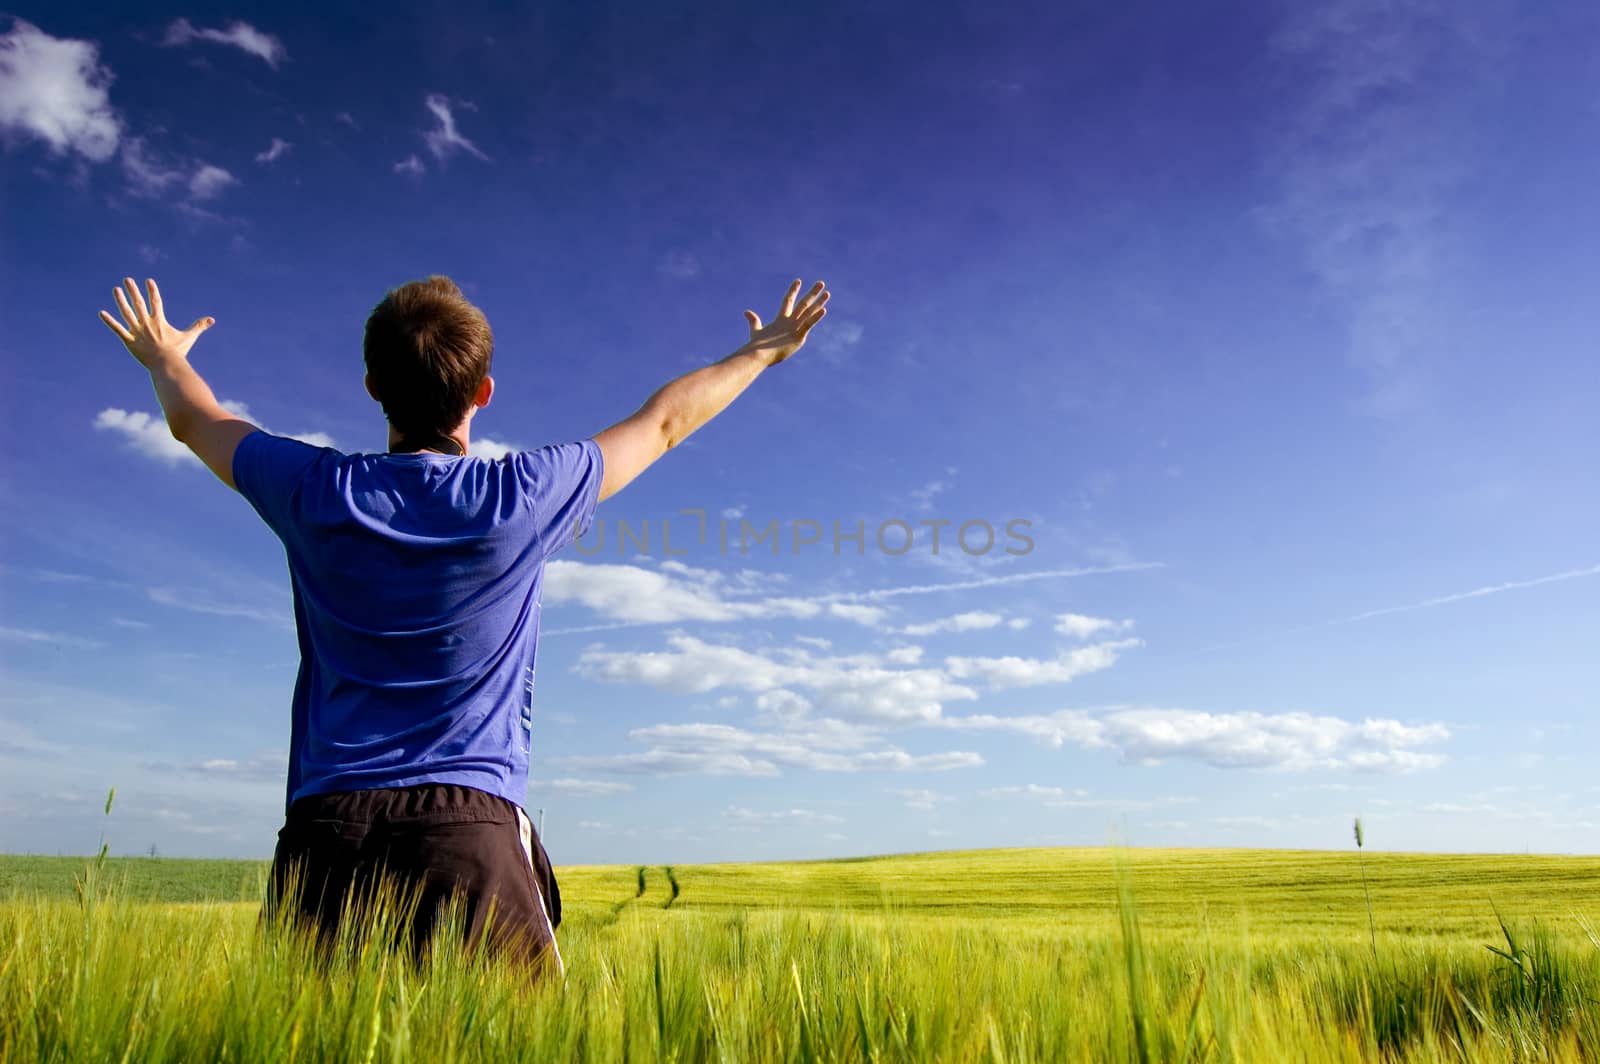 Man standing on the green field at summer and feel the freedom.